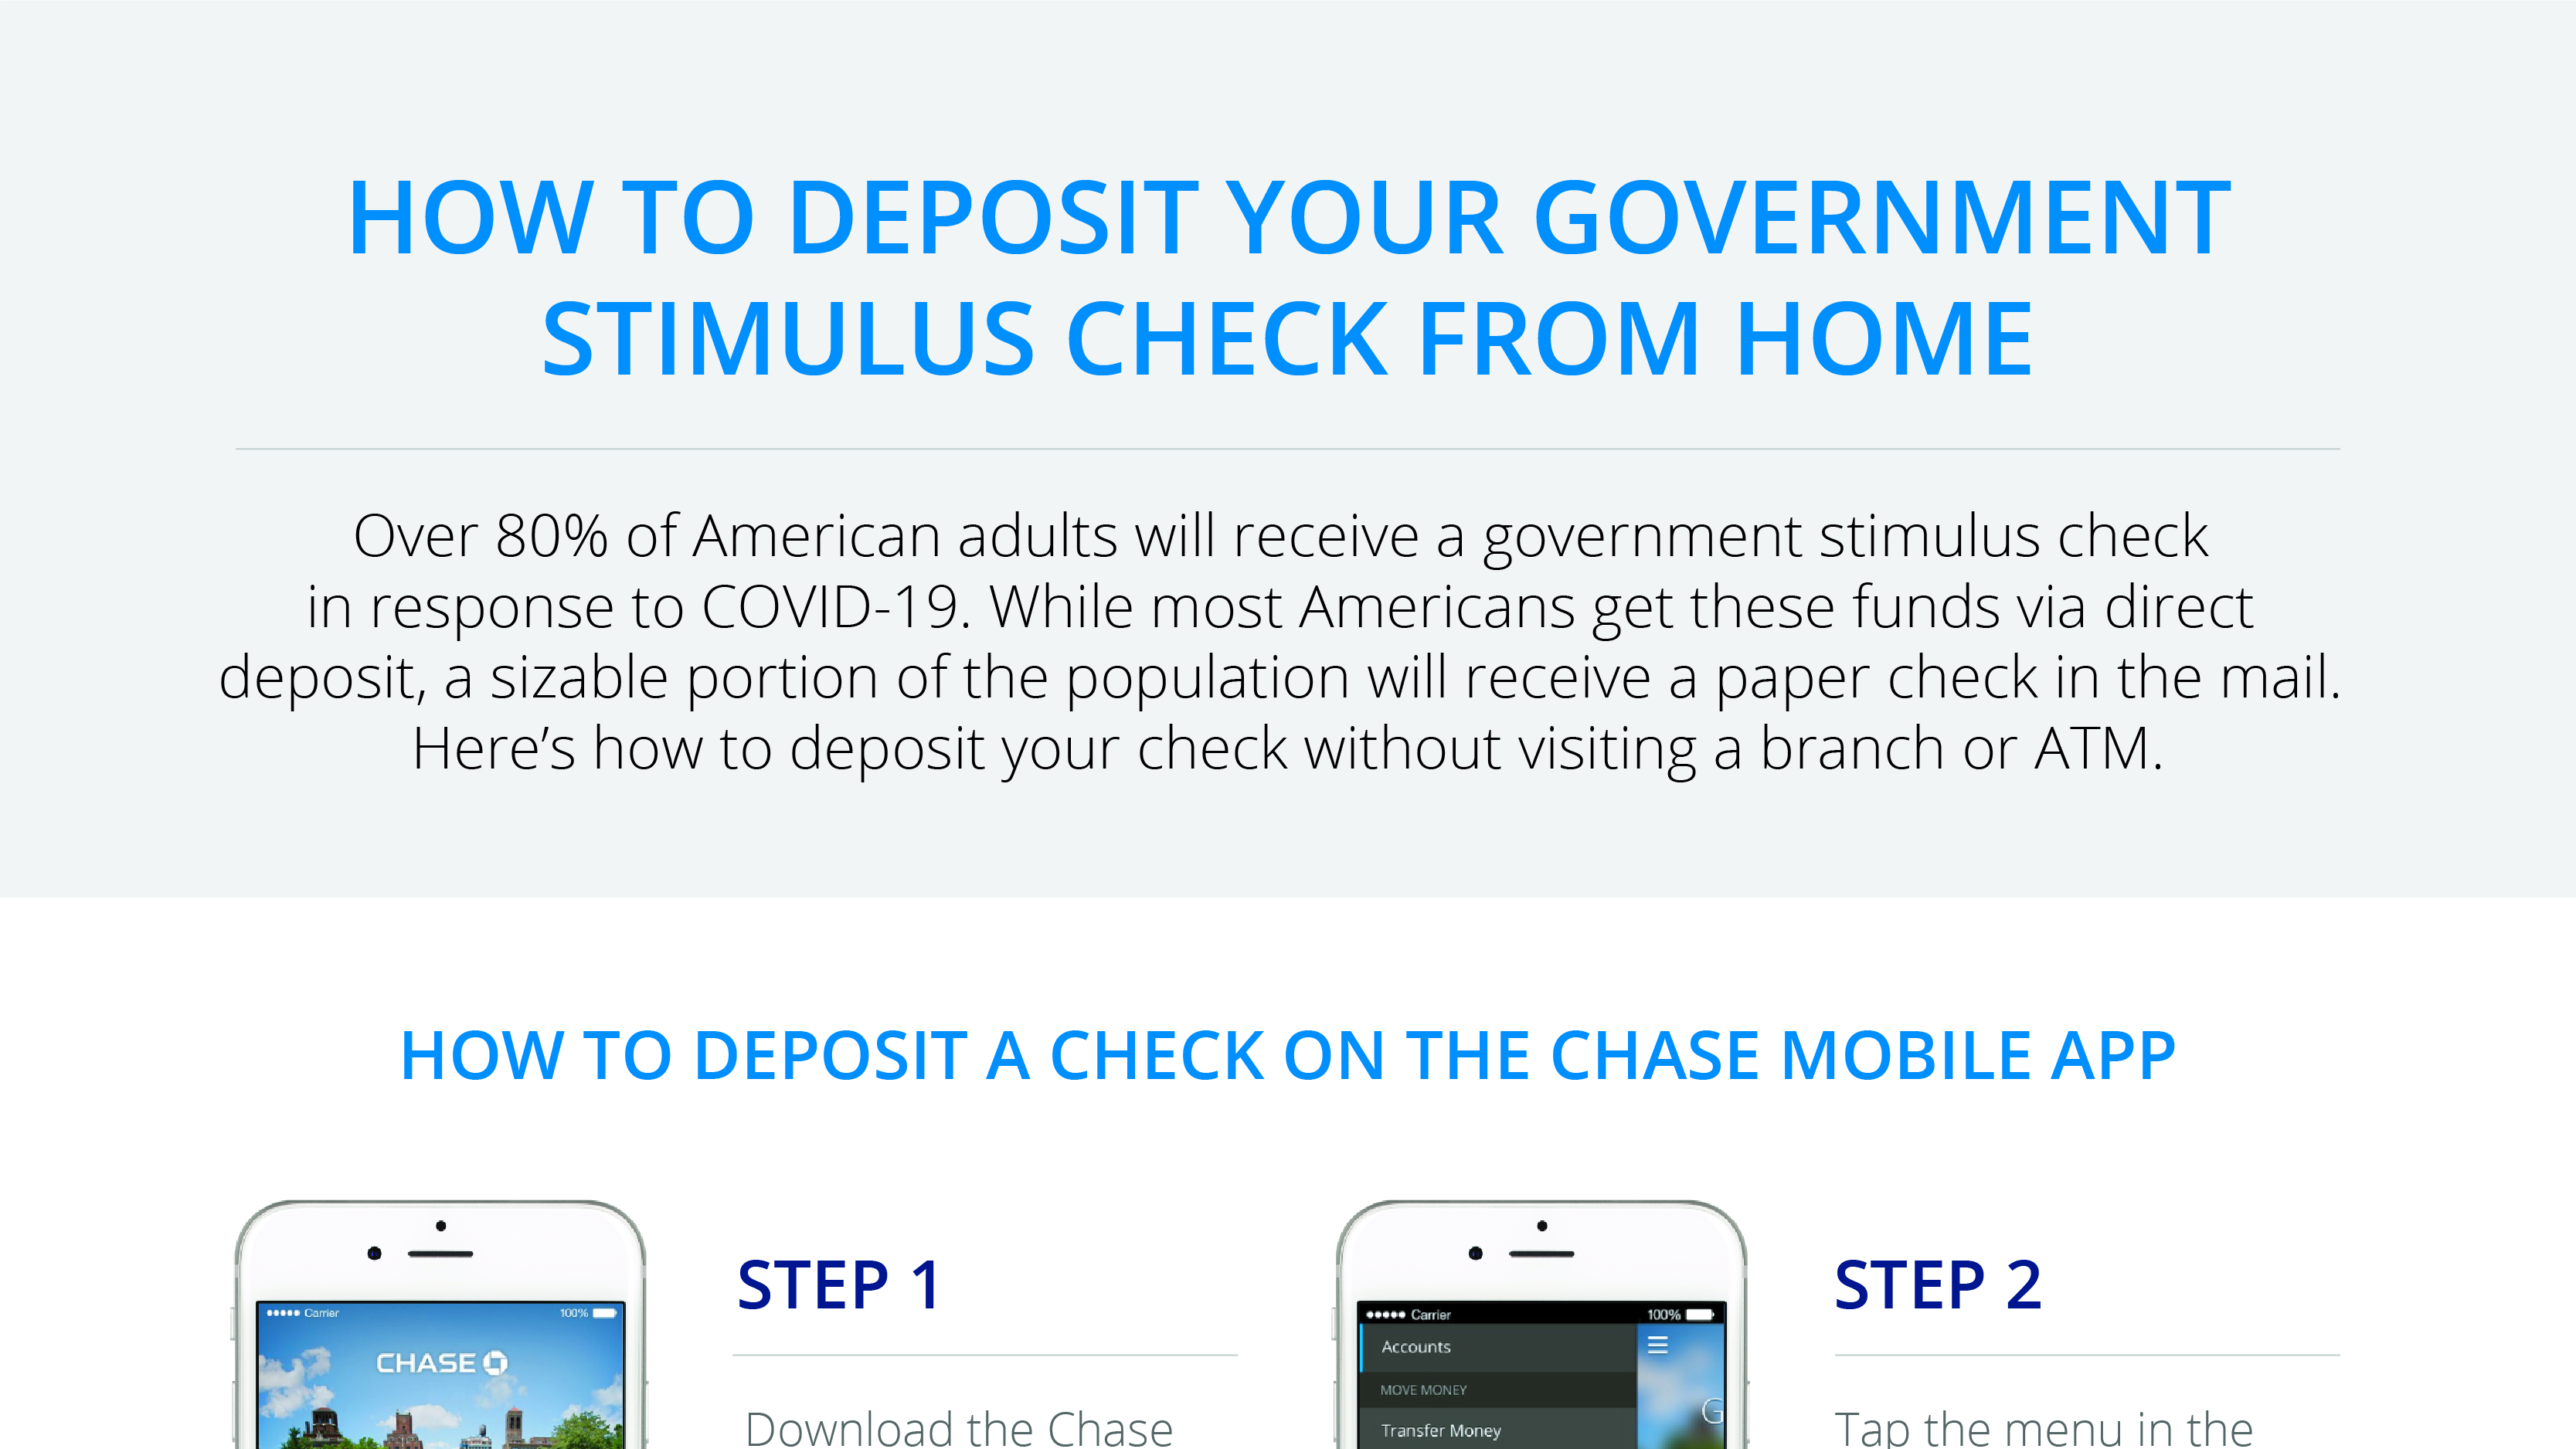 HOW TO DEPOSIT YOUR GOVERNMENT STIMULUS CHECK FROM HOME